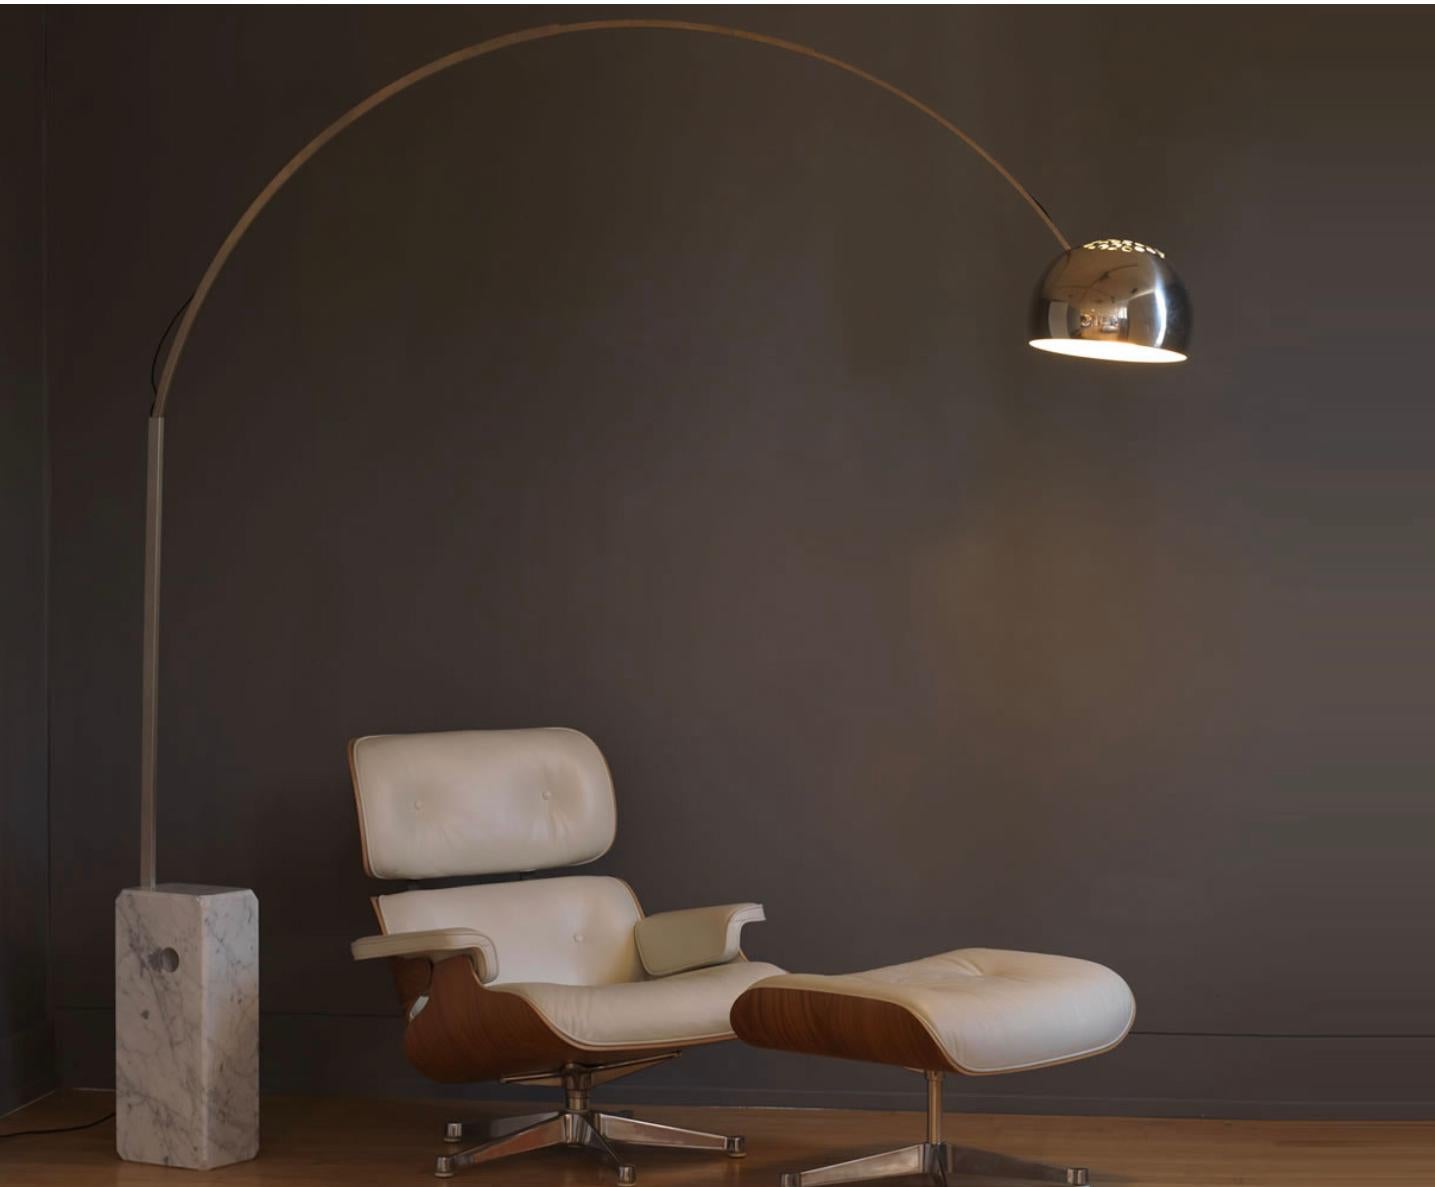 Arco Lamp by Achille Castiglioni for Flos, Italian Mid-Century Modern 1962 Italy 1